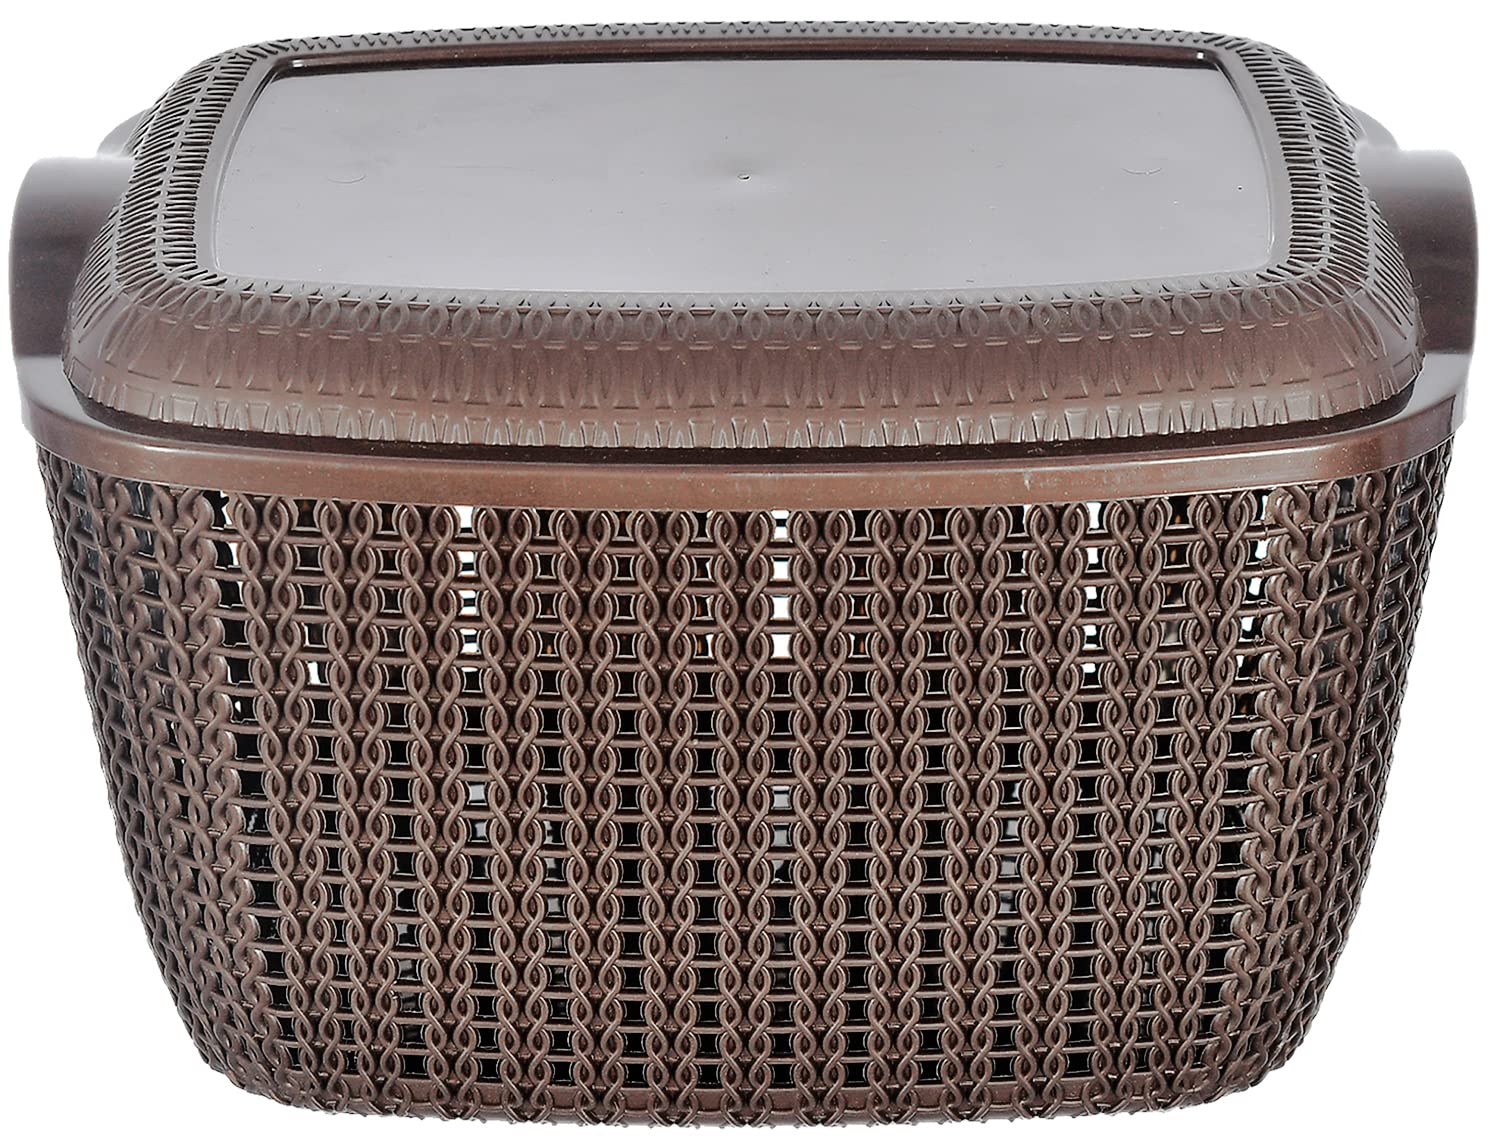 Heart Home Multiuses Large M 30 Plastic Basket/Organizer With Lid- Pack of 4 (Brown) -46HH011